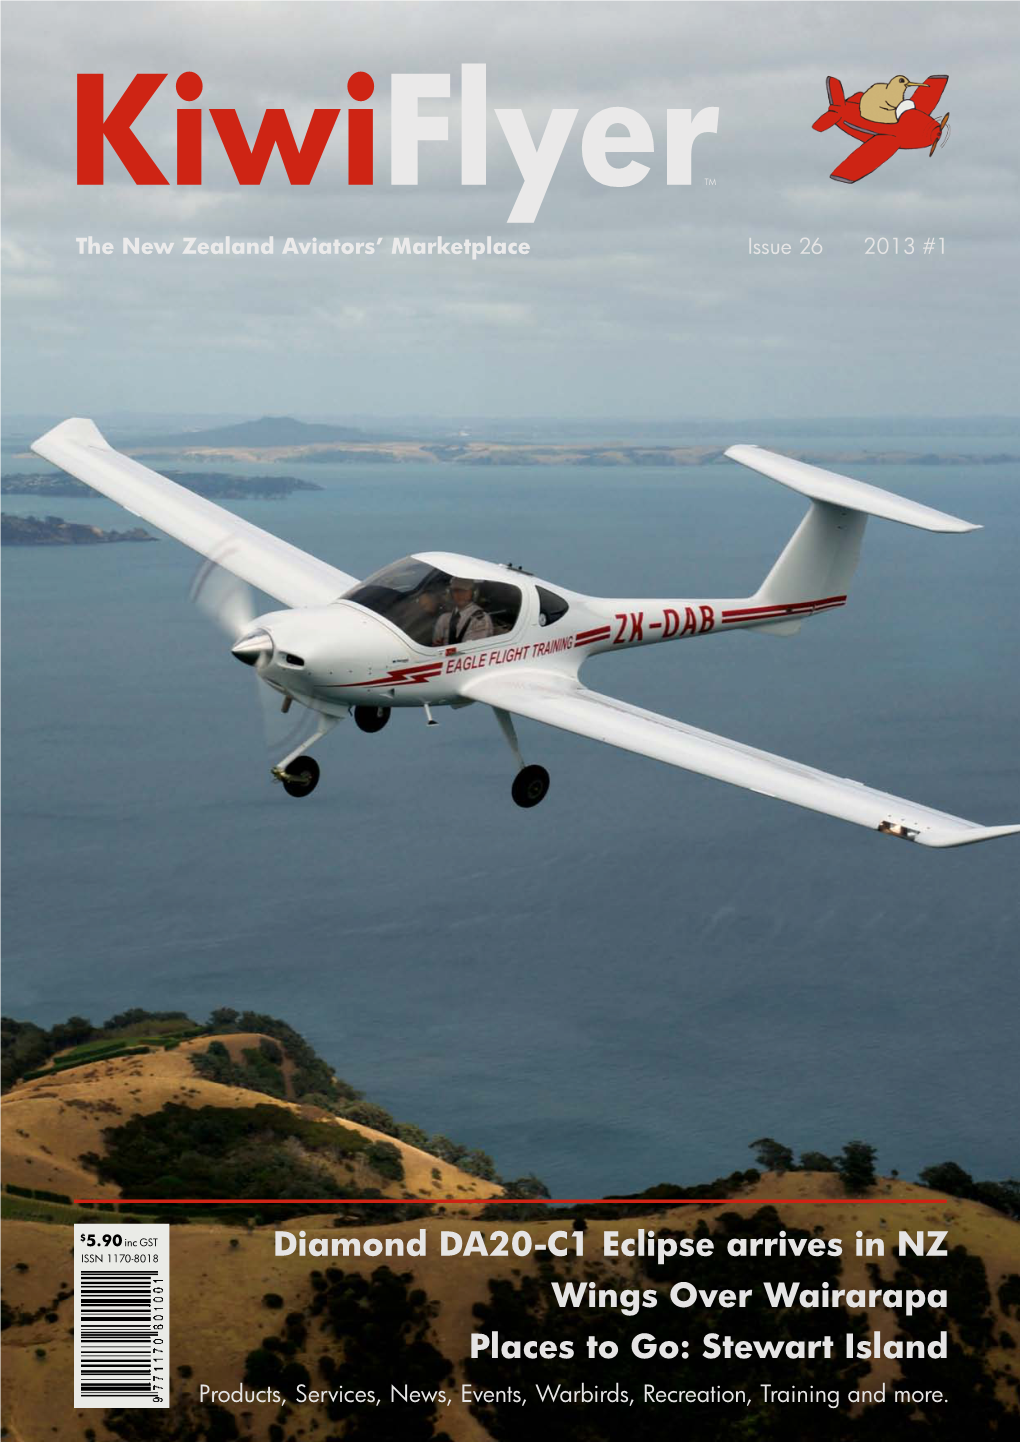 Diamond DA20-C1 Eclipse Arrives in NZ Wings Over Wairarapa Places to Go: Stewart Island Products, Services, News, Events, Warbirds, Recreation, Training and More